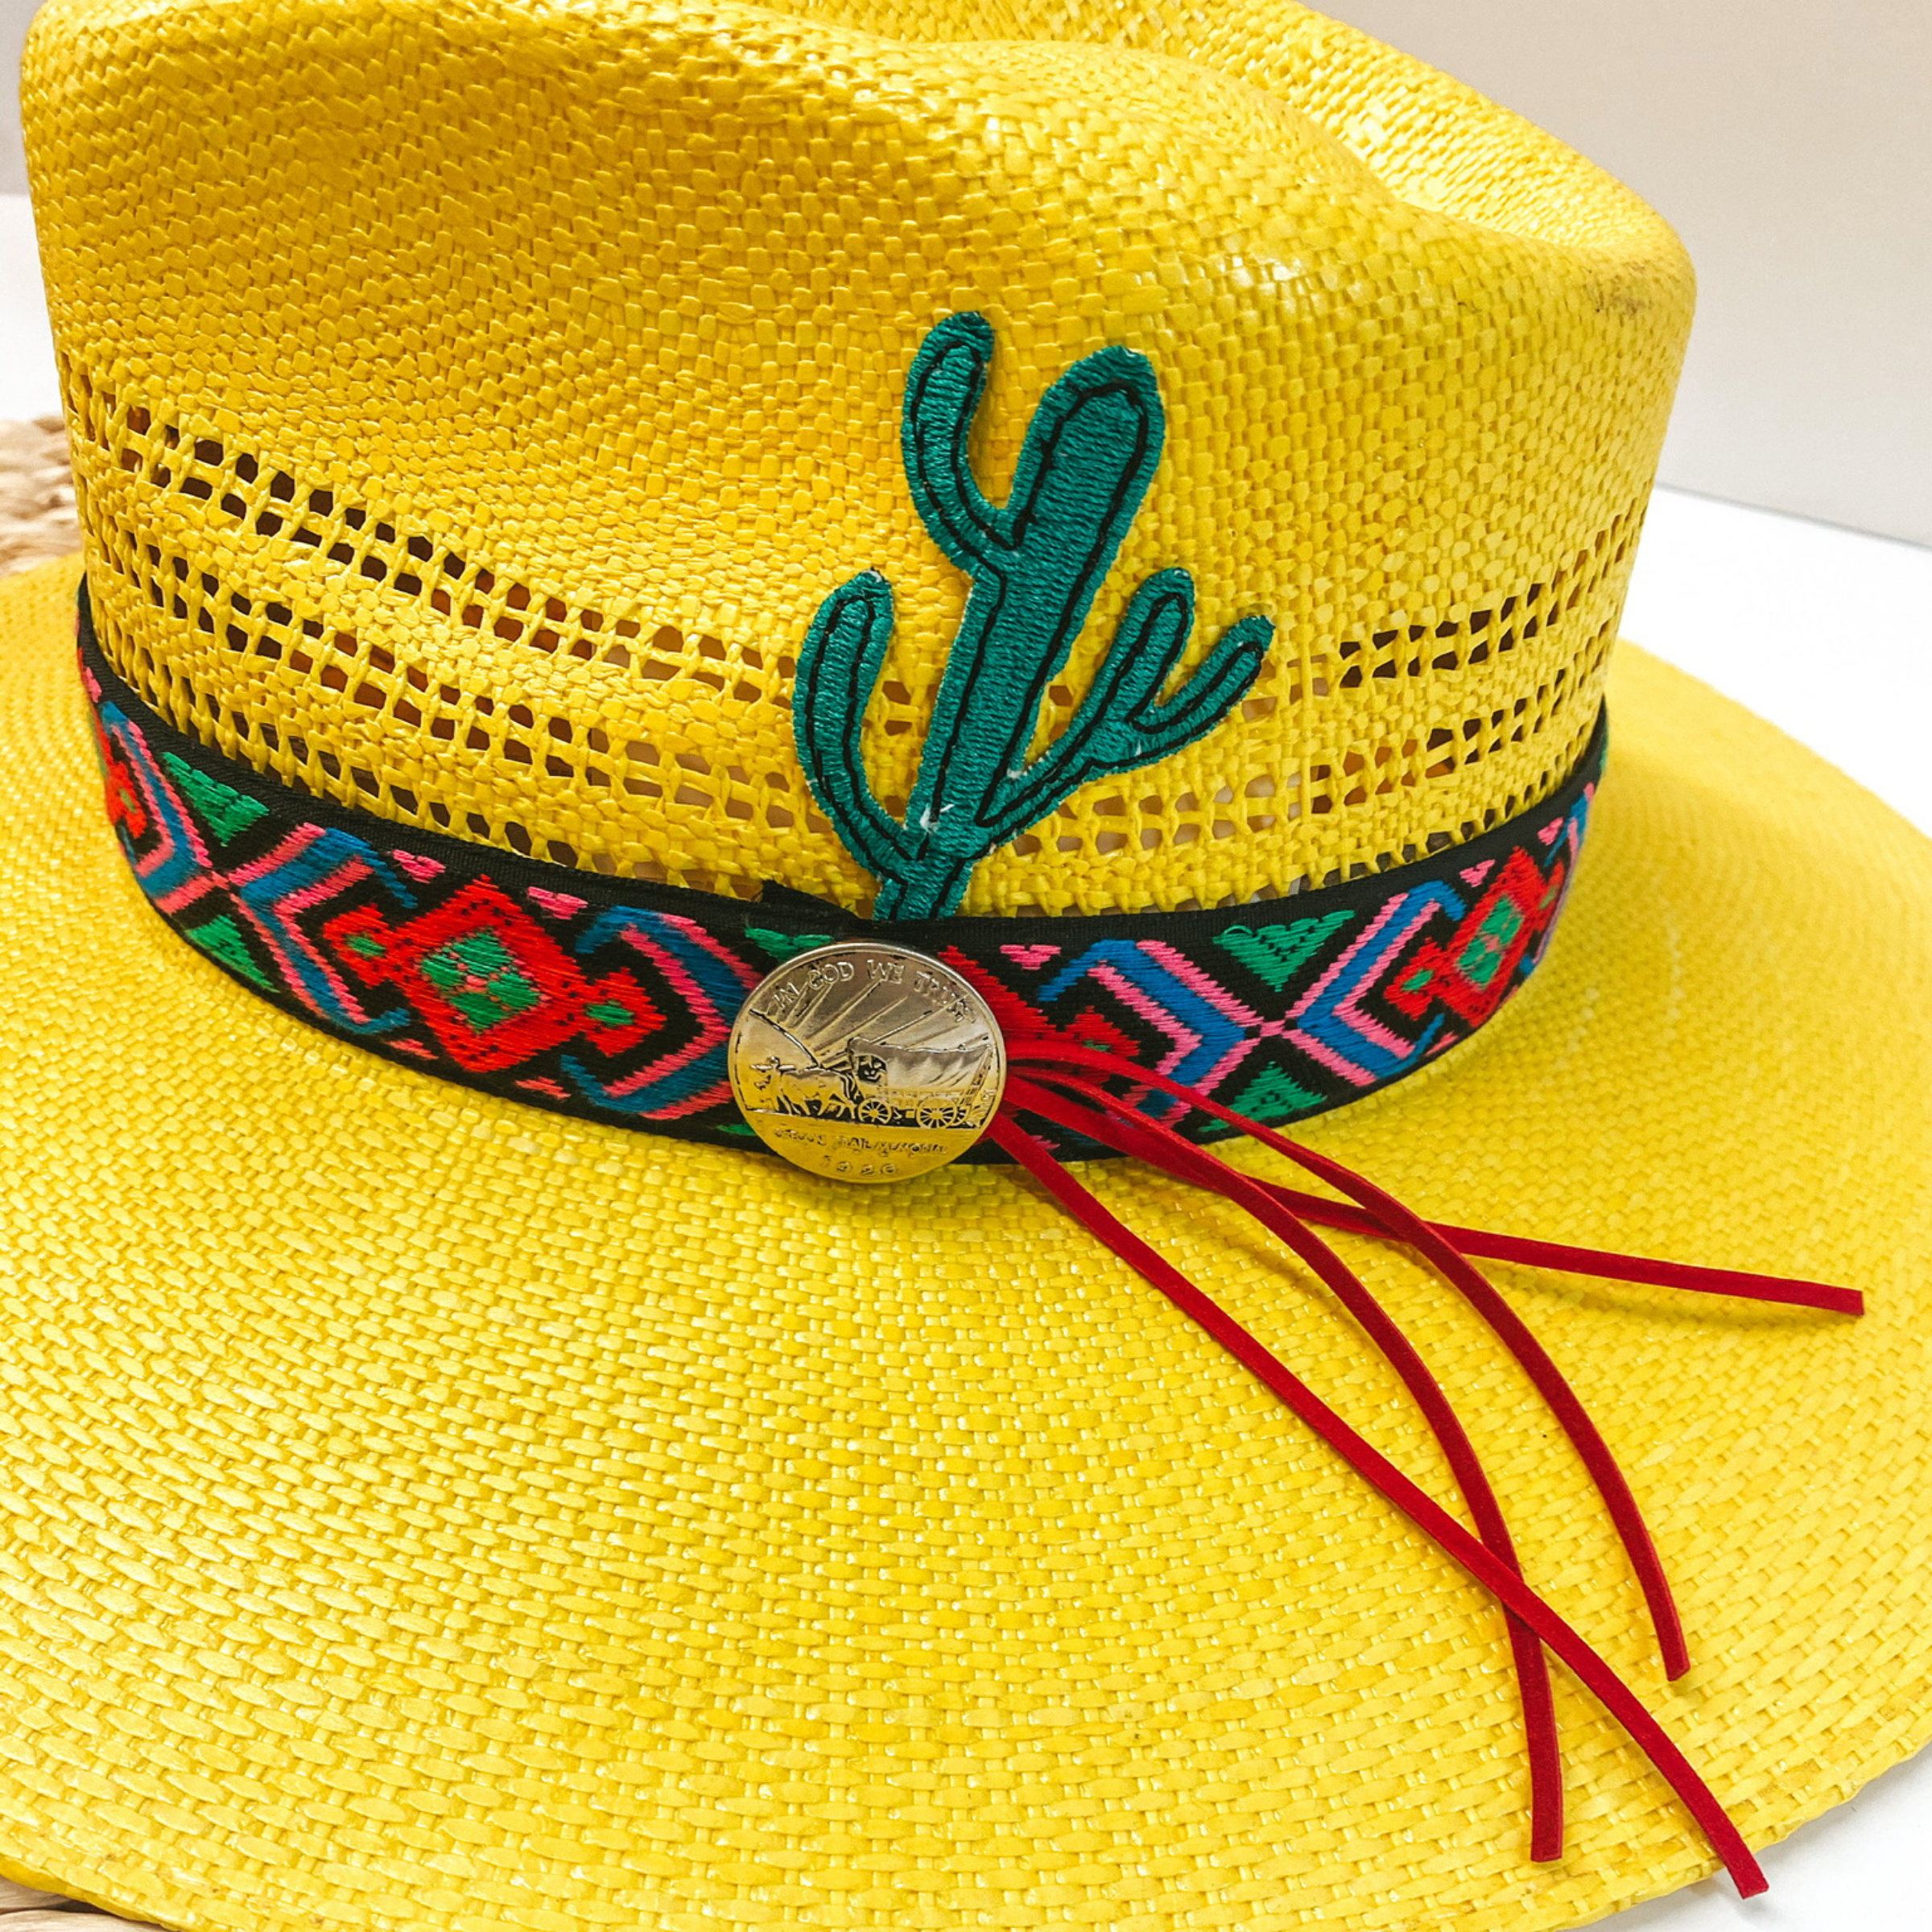 Charlie 1 Horse | Mariachi Stiff Brim Straw Hat with Colorful Design Band, Coin Pendant and Cactus Detailing - Giddy Up Glamour Boutique